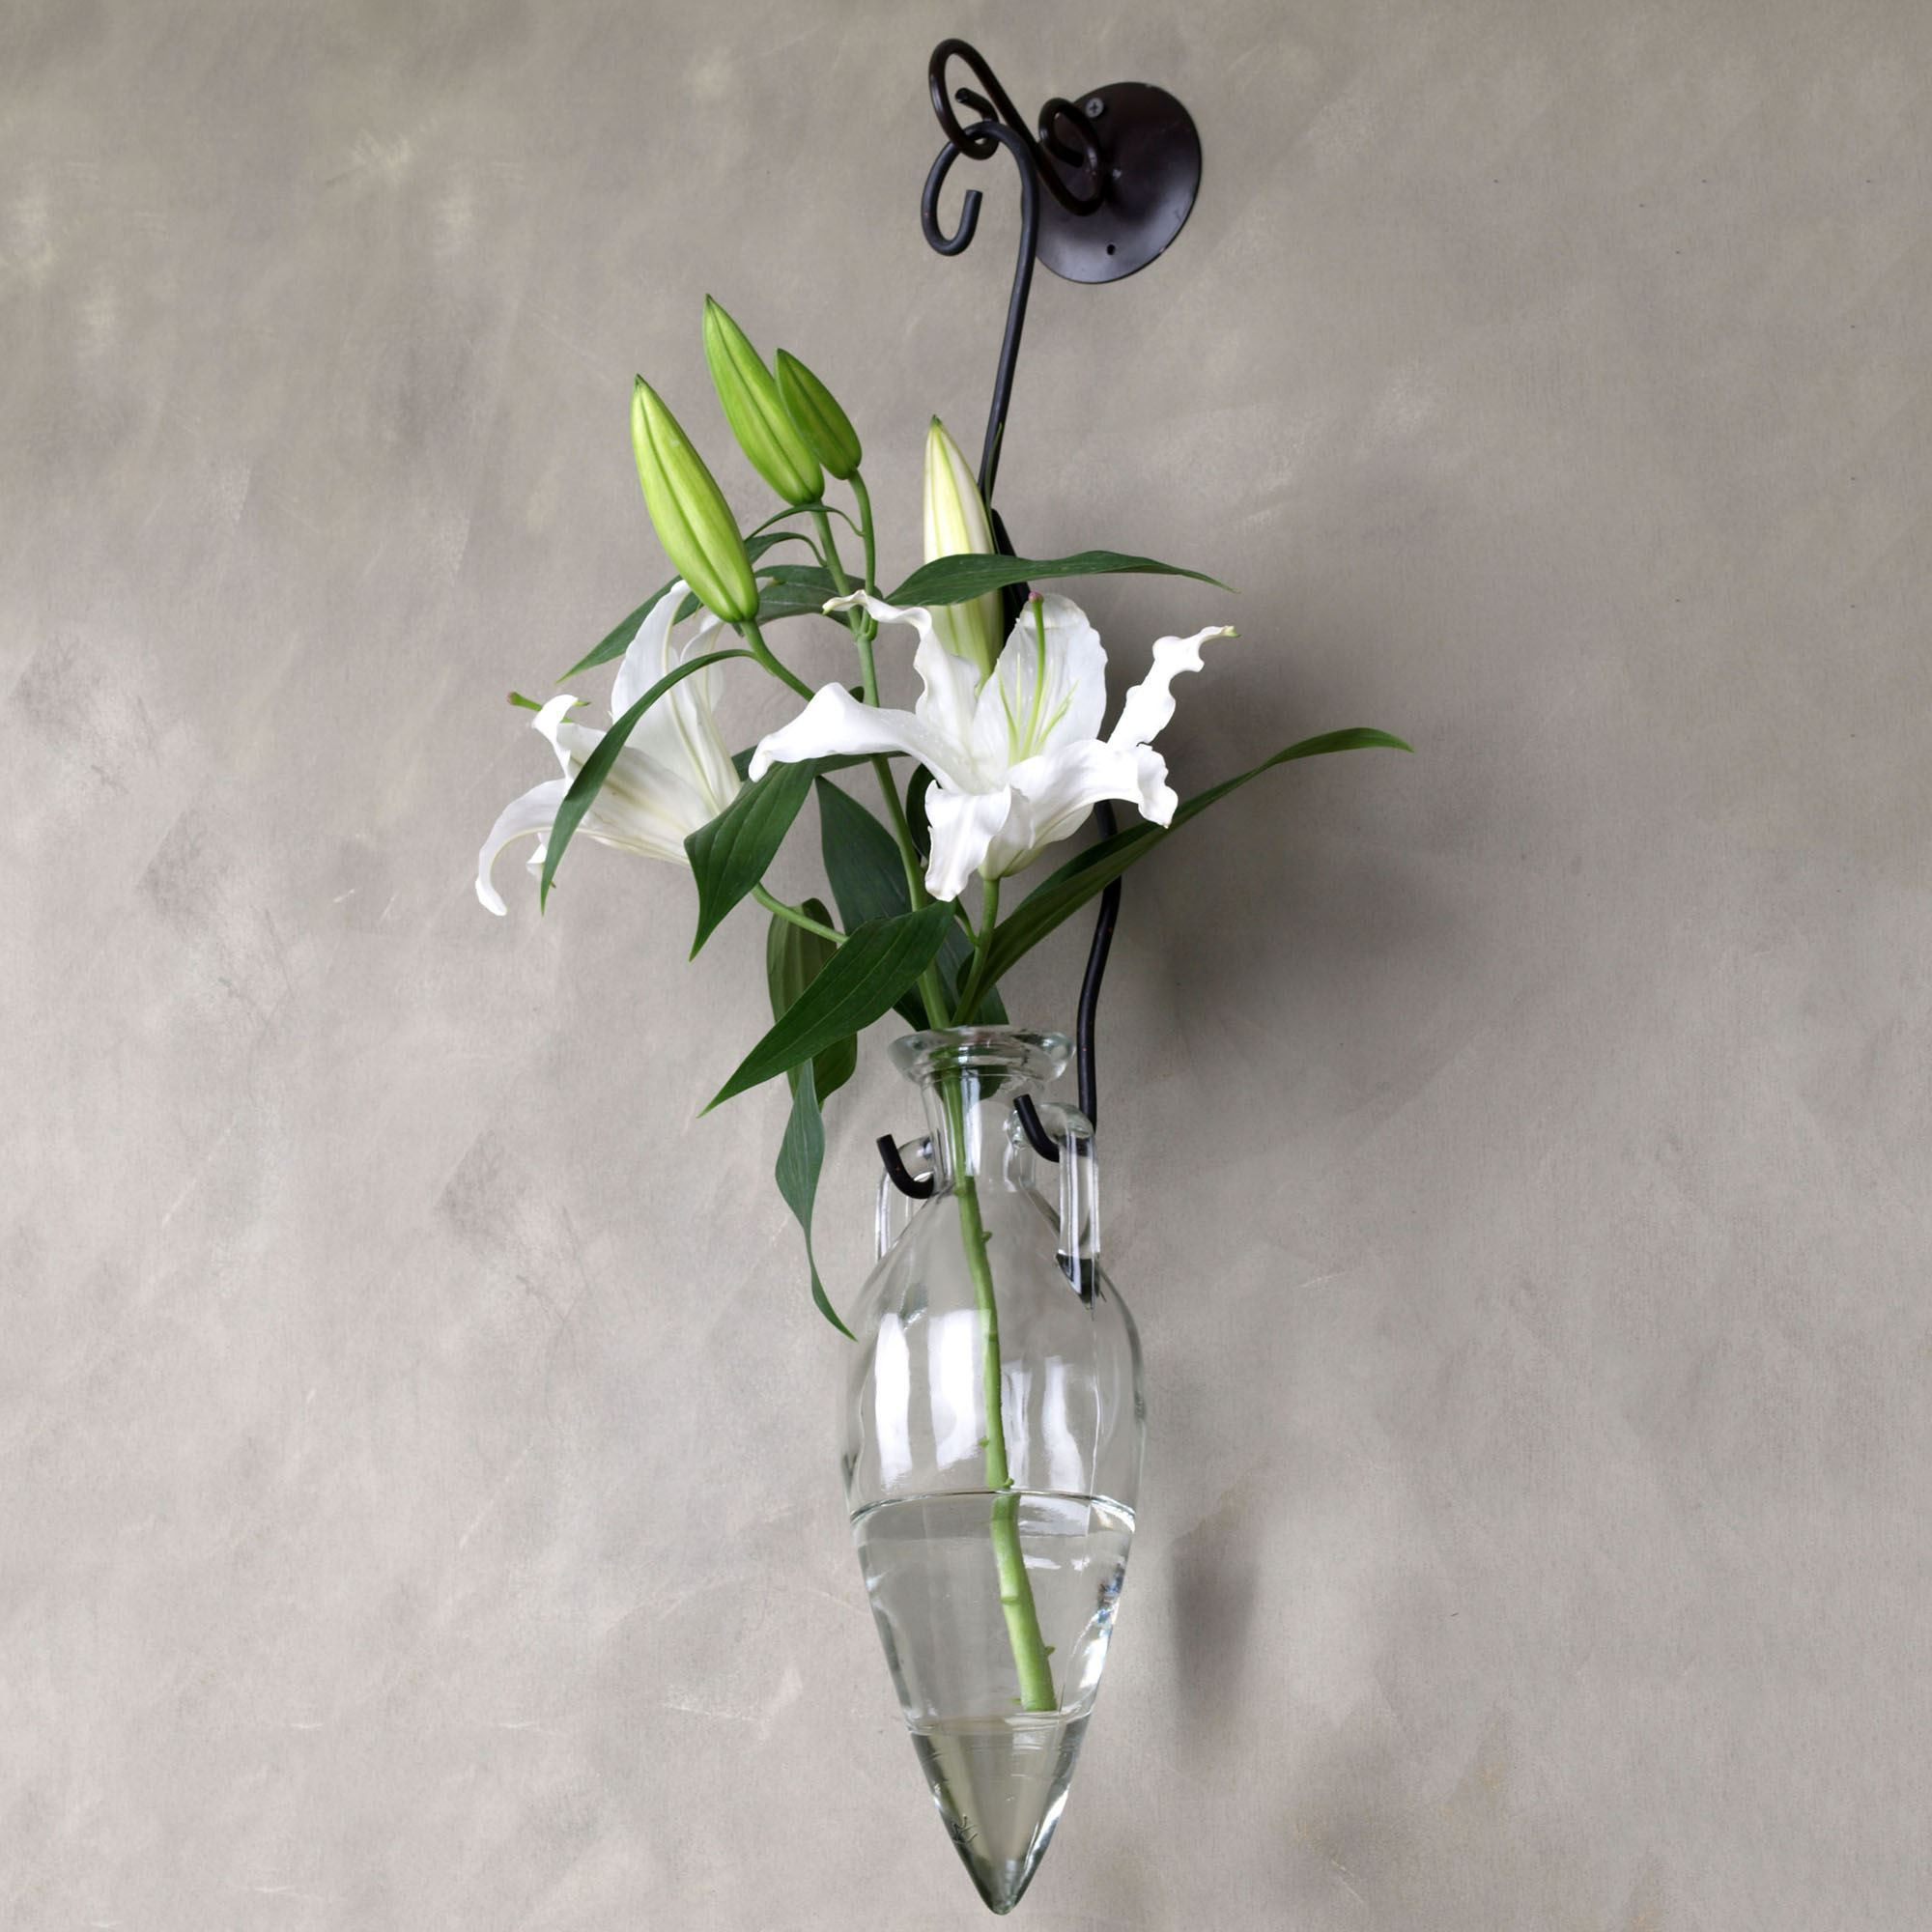 19 attractive Flower and Vase Decor 2024 free download flower and vase decor of wall decor flowers great h vases wall hanging flower vase newspaper in wall decor flowers great h vases wall hanging flower vase newspaper i 0d scheme wall scheme